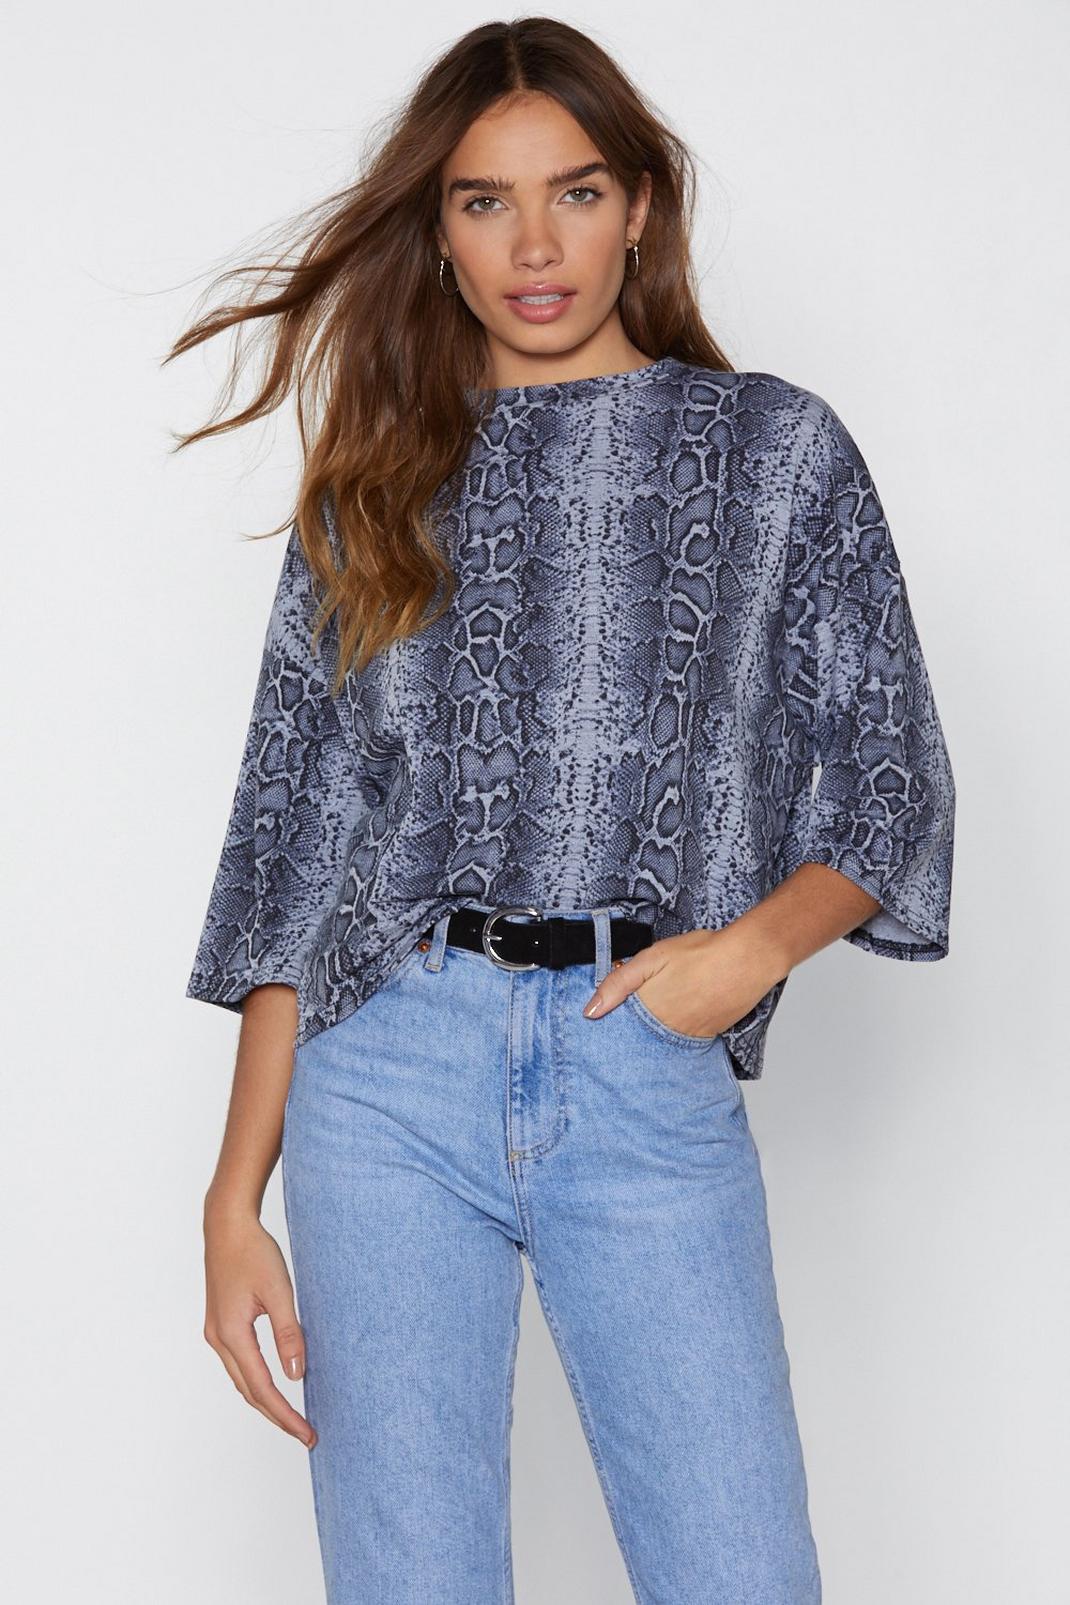 Snake a Night of It Cropped Tee | Nasty Gal